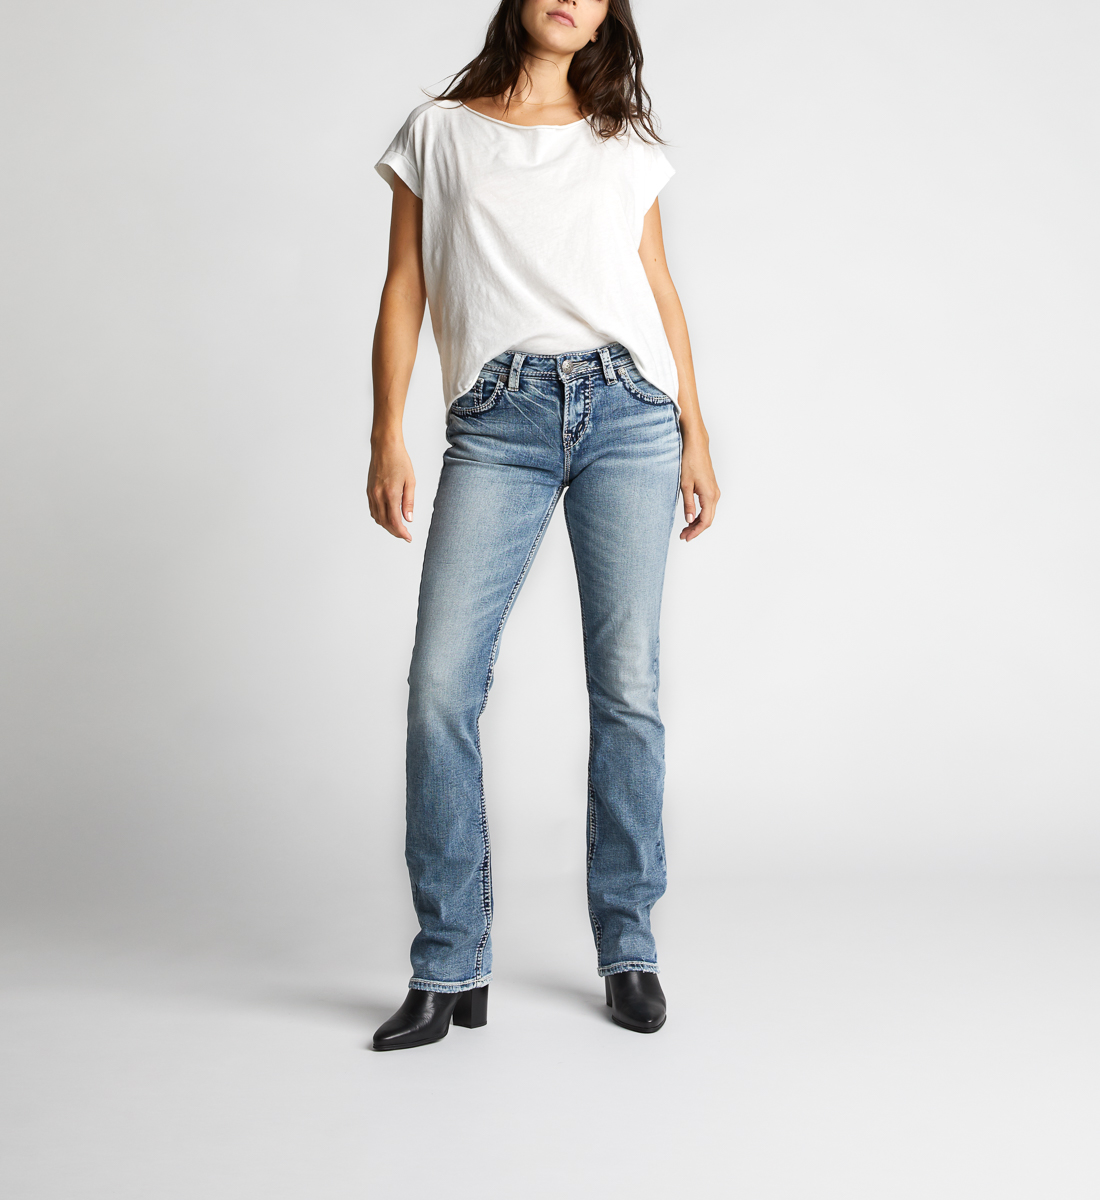 Suki High Baby Boot Light Wash Women's Jeans | Silver Jeans Co.